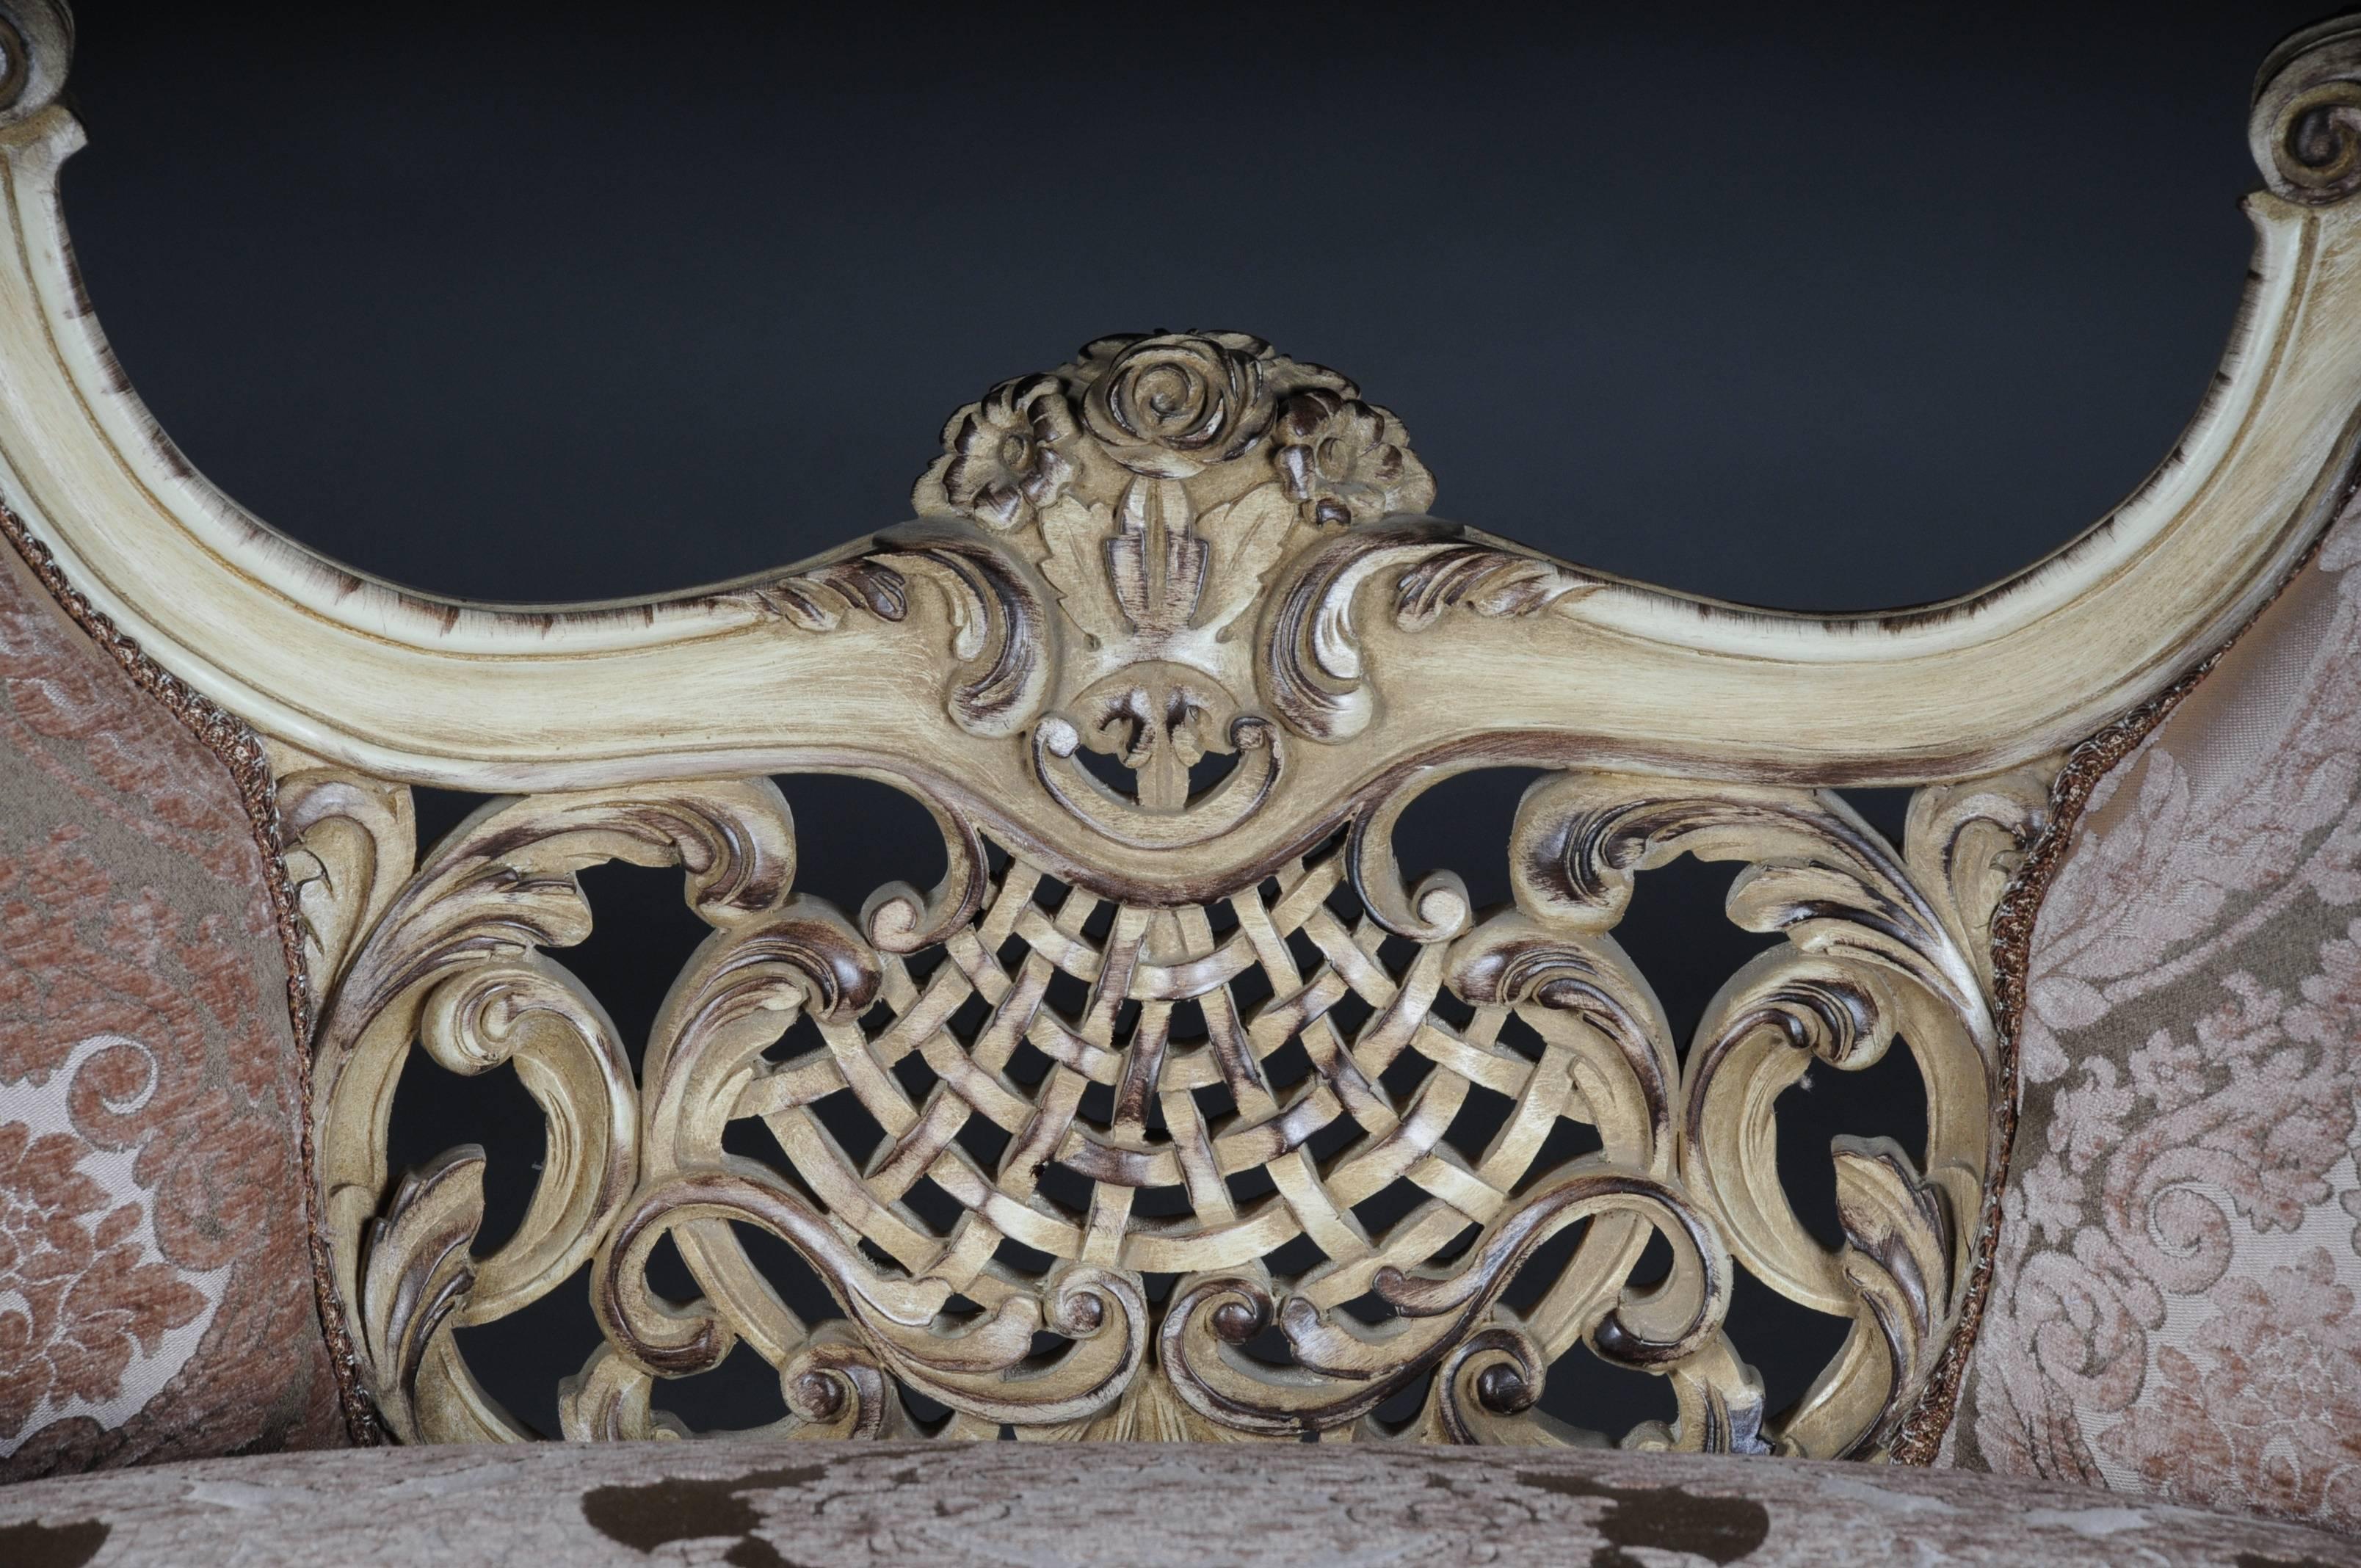 Solid beechwood, carved and gilt gilded. Semi circular rising, curved backrest framing with rocaille crowning. Appropriately curved frame with rich carved foliage. Profiled frame on curved legs. Seat and backrest are finished with a historical,